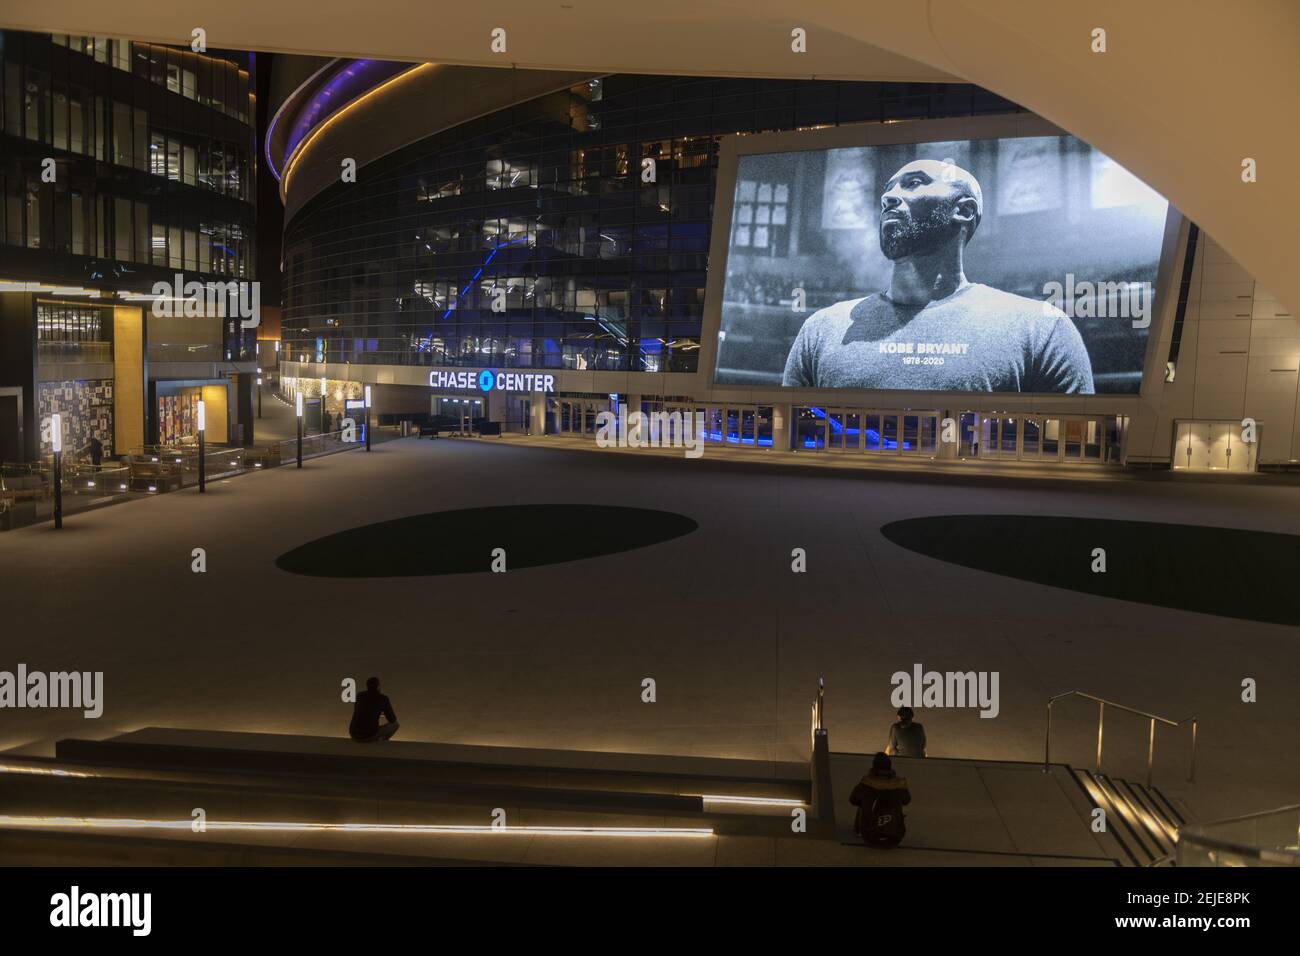 People gather quietly in front of a large image of former Los Angeles basketball player Kobe Bryant at Chase Center in San Francisco, California, United States on January 27, 2020 to pay tribute the legendary sportsman. The world famous NBA player was killed in a helicopter accident on January 26, 2020 when his private Sikorsky S-76B helicopter crashed into a mountain in Calasabas, California and killed 9 people, including his daughter Gigi Bryant. (Photo by Yichuan Cao/Sipa USA) Stock Photo